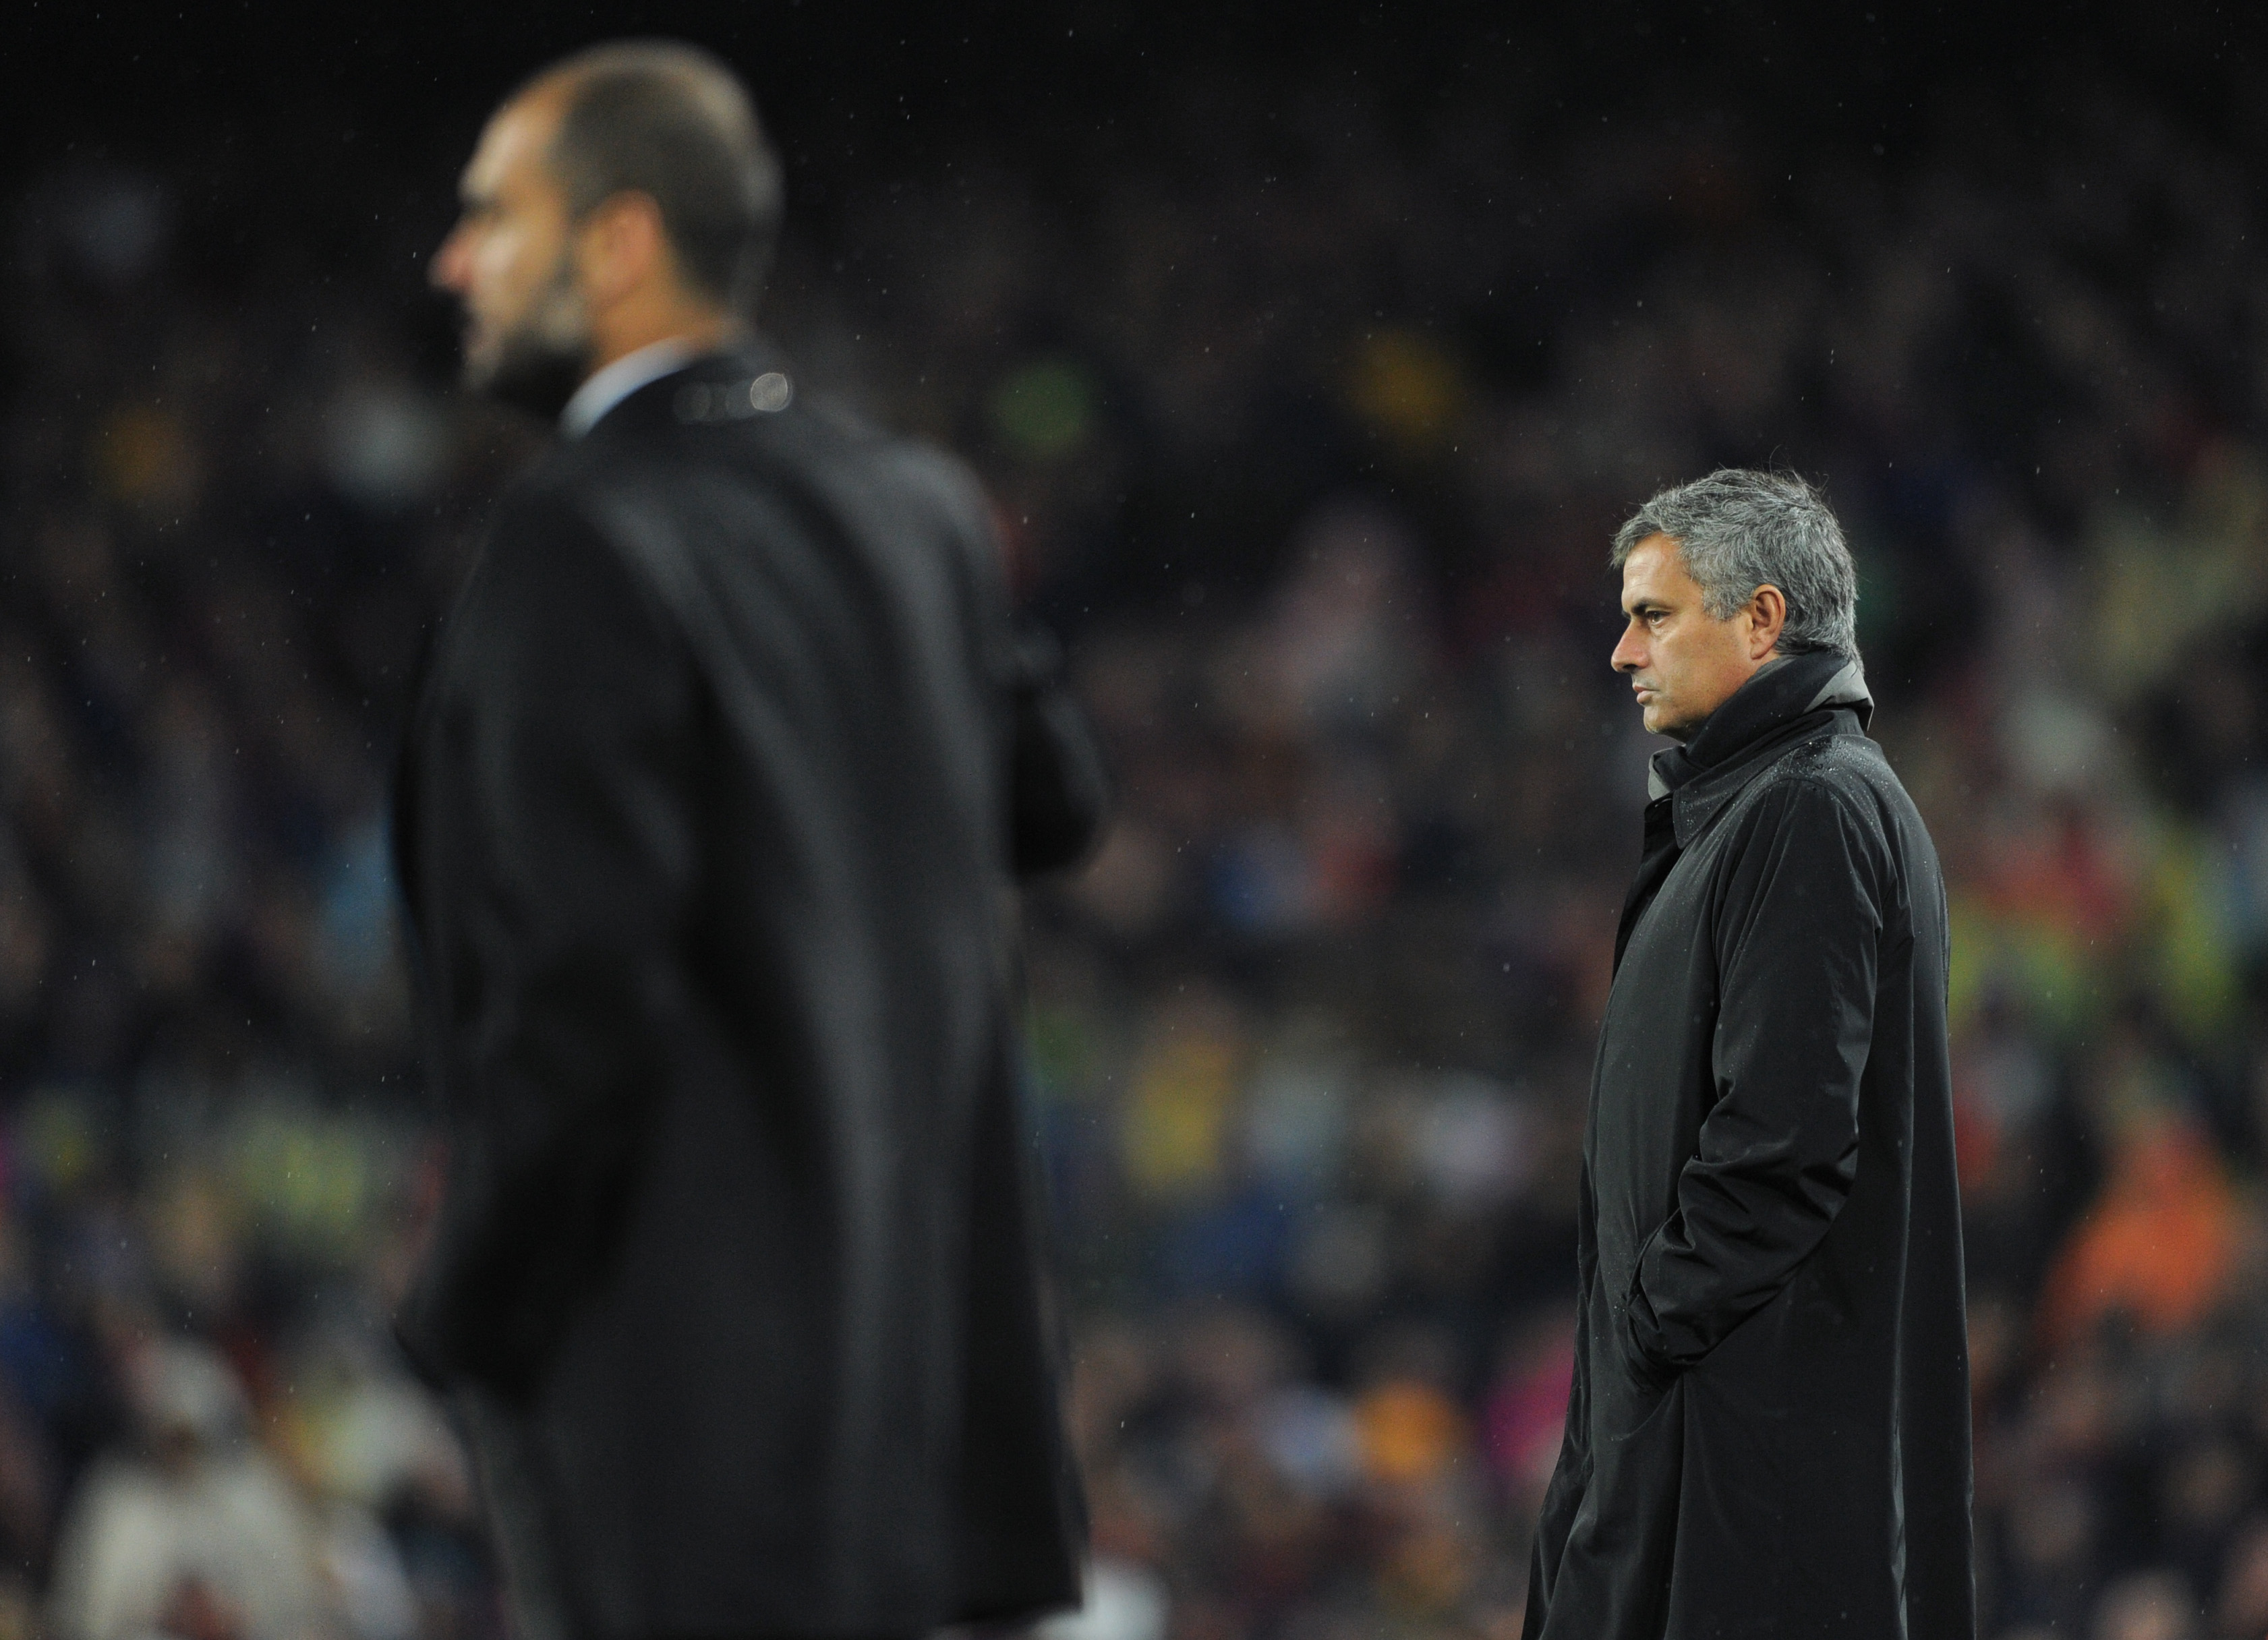 BARCELONA, SPAIN - NOVEMBER 29:  Head coach Jose Mourinho (R) of Real Madrid follows the game flanked by head coach Josep Guardiola of Barcelona during the la liga match between Barcelona and Real Madrid at the Camp Nou stadium on November 29, 2010 in Bar